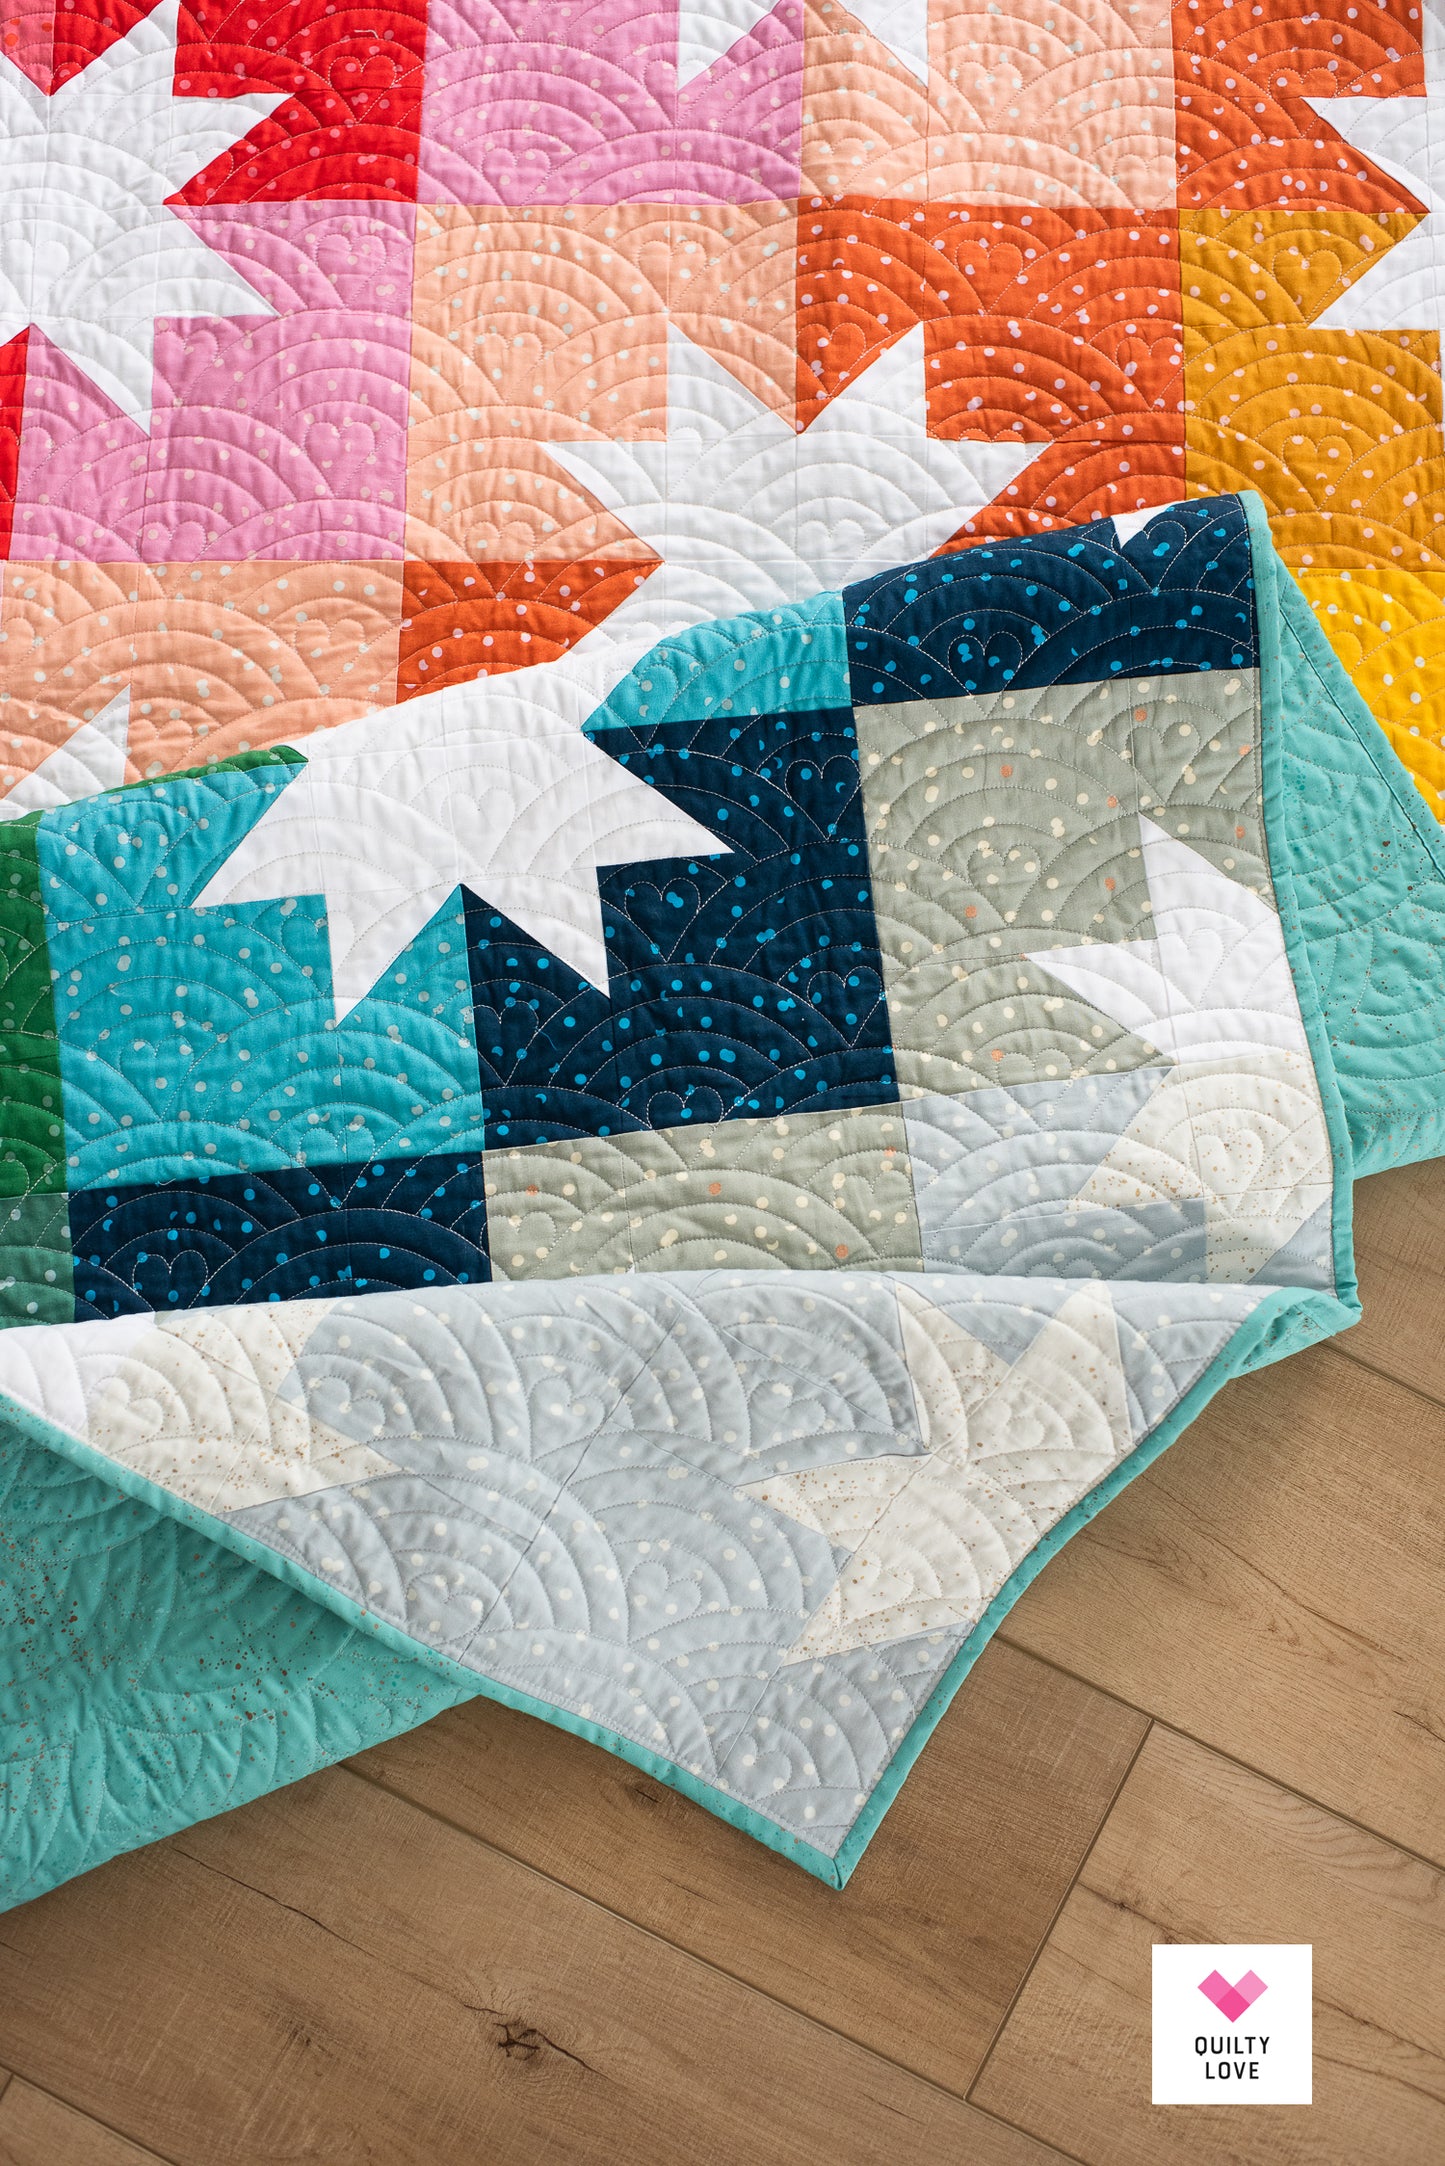 Star Pop II Quilt - The Hole Punch Dot rainbow one